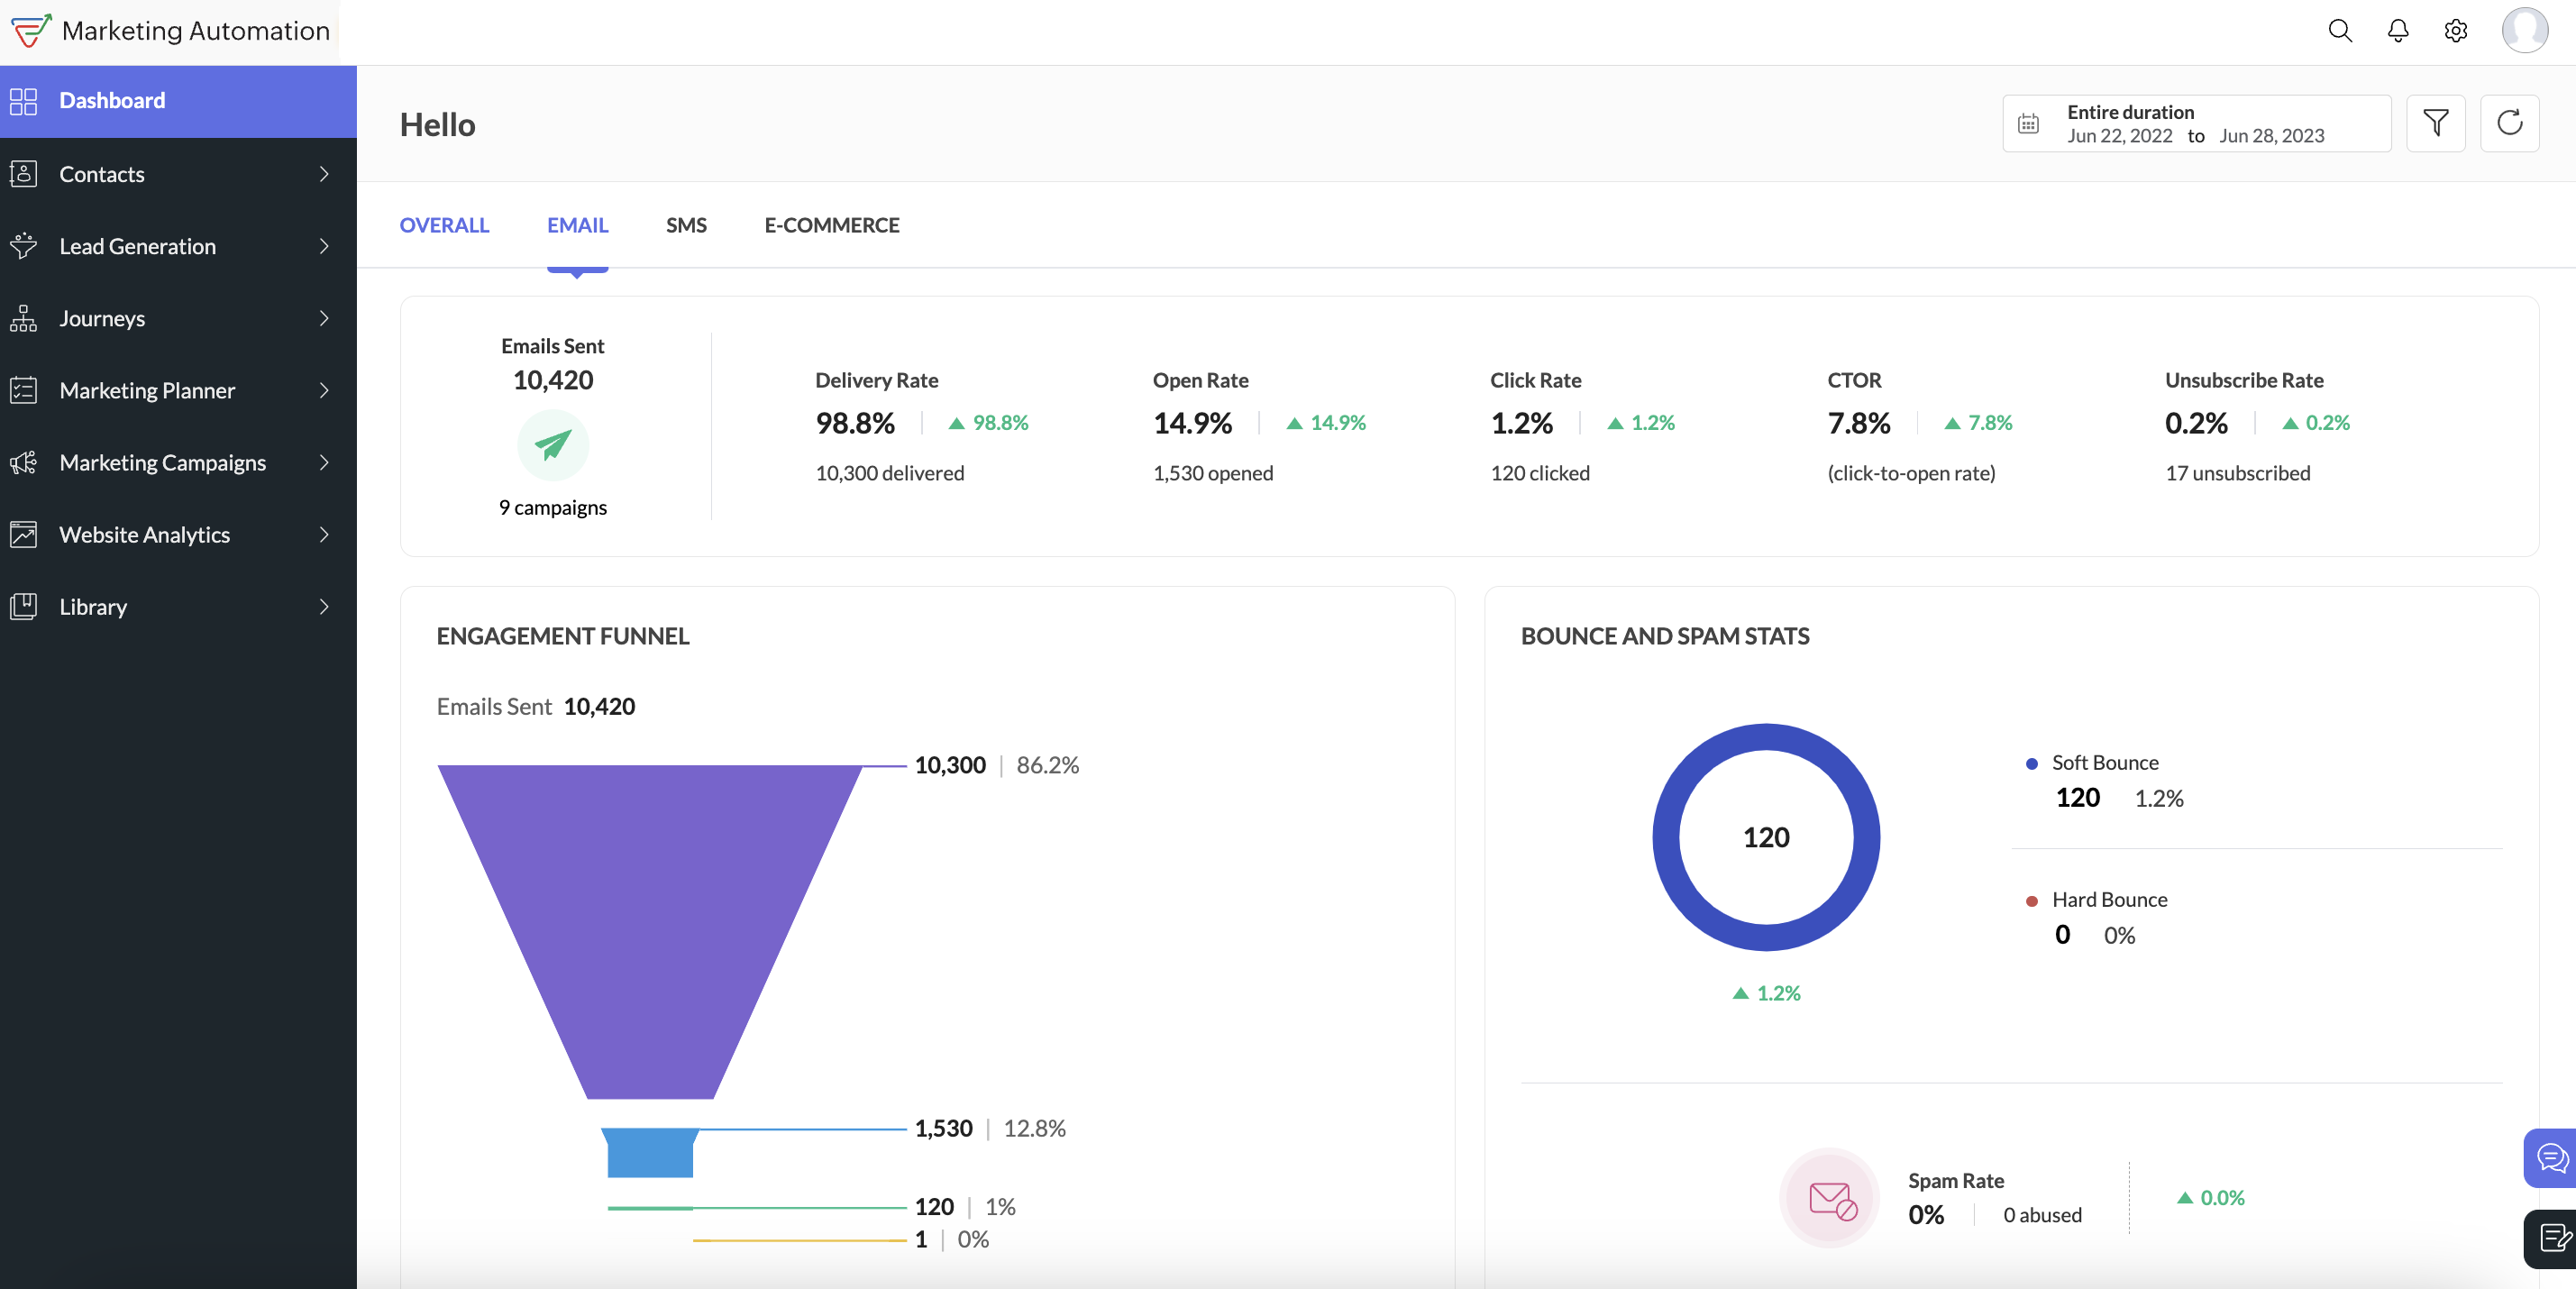 Get a comprehensive 360 degree view of your leads across channels. Know what stage your leads are at, identify top lead generating sources and how your campaigns are performing all from one single dashboard.